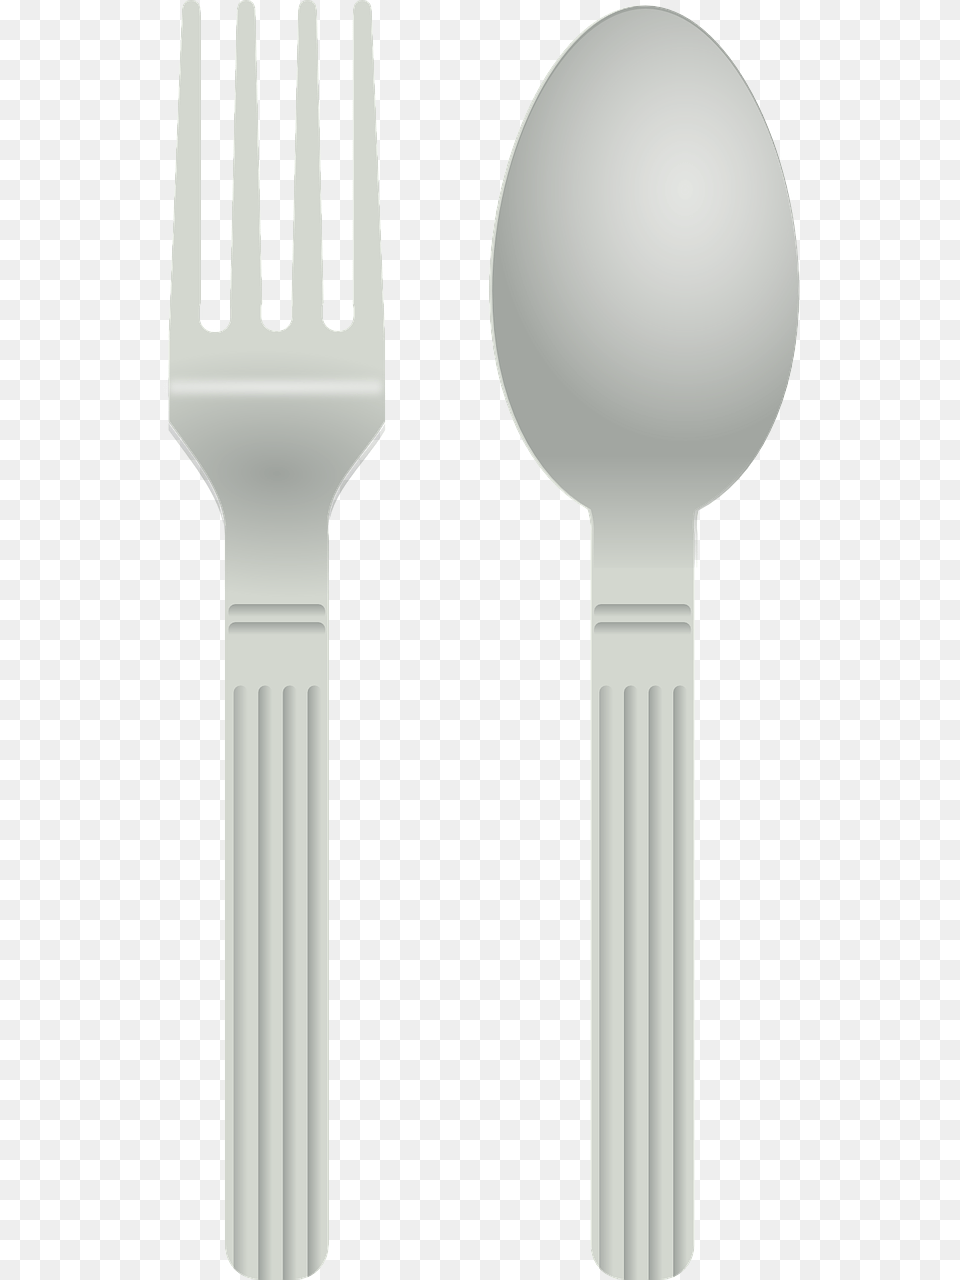 Spoon Clip Art, Cutlery, Fork Png